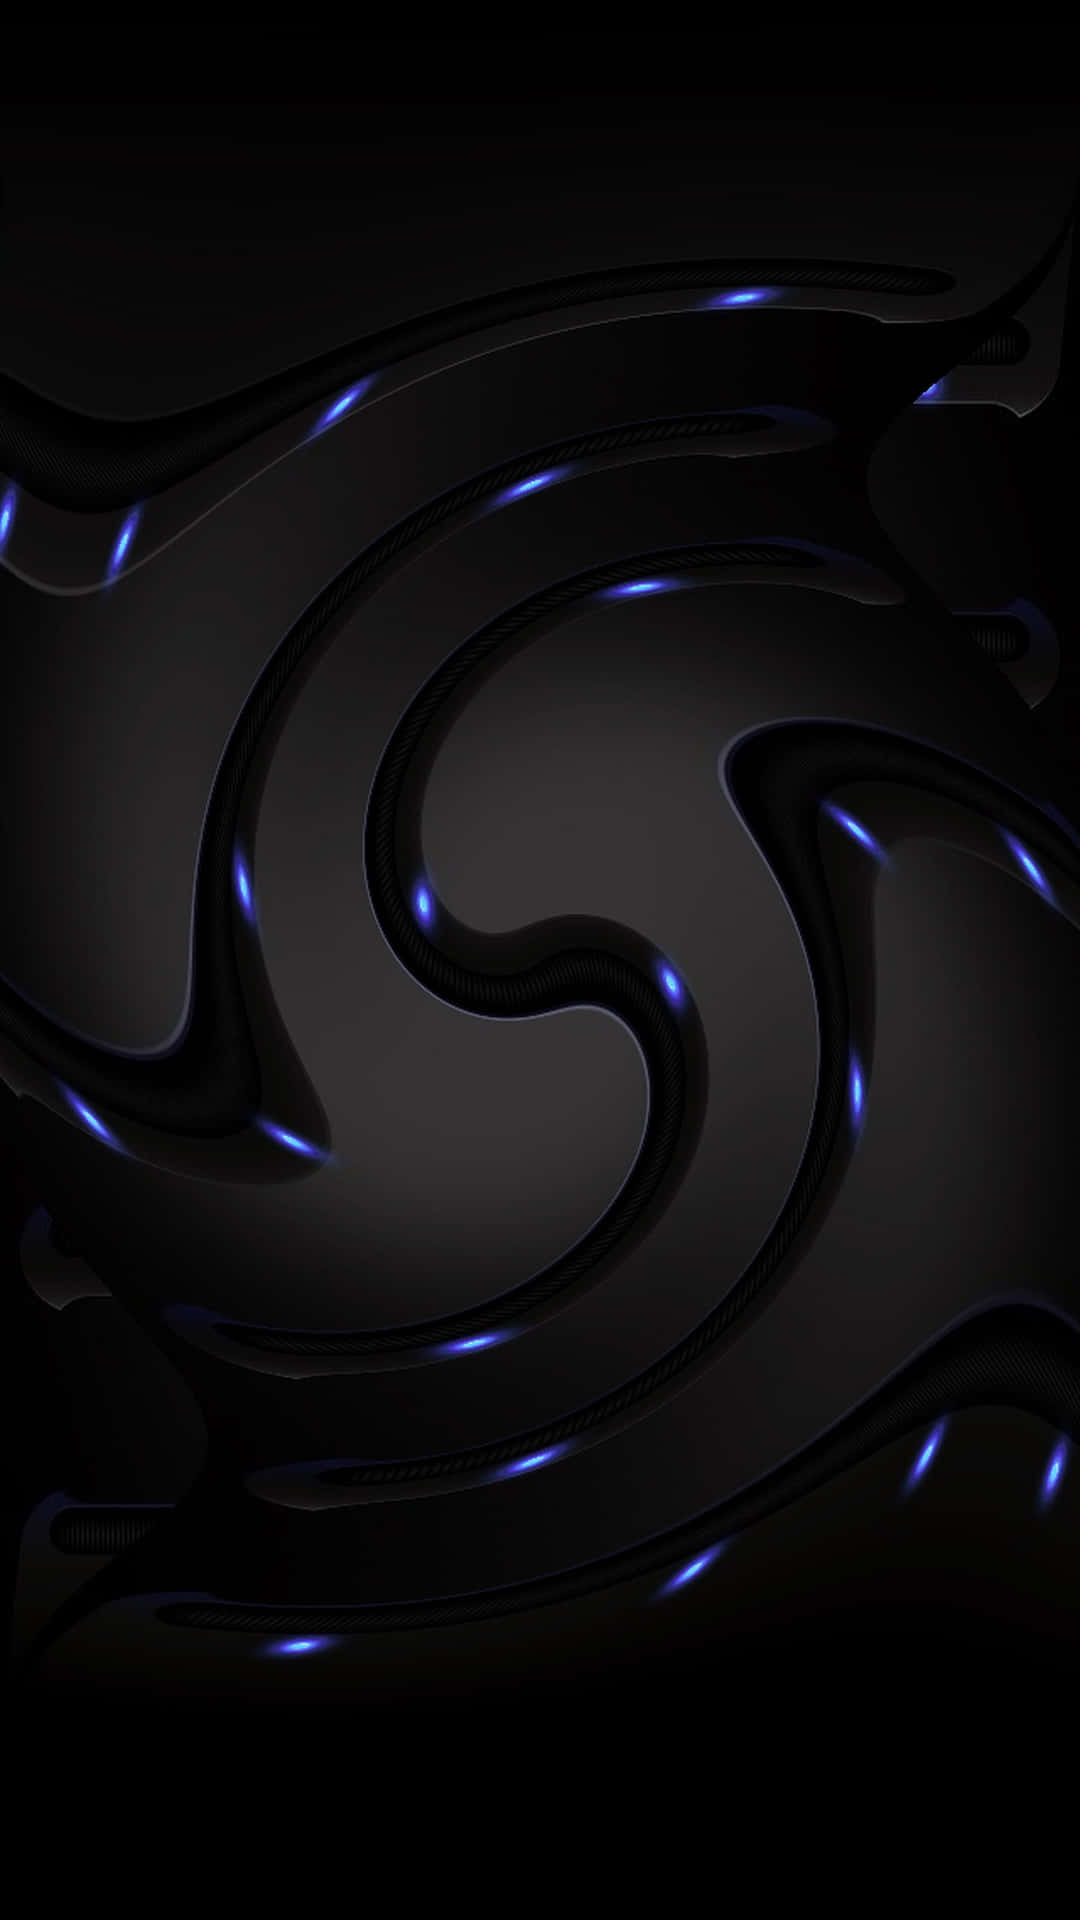 A Blue And White Swirling Pattern On A Black Background